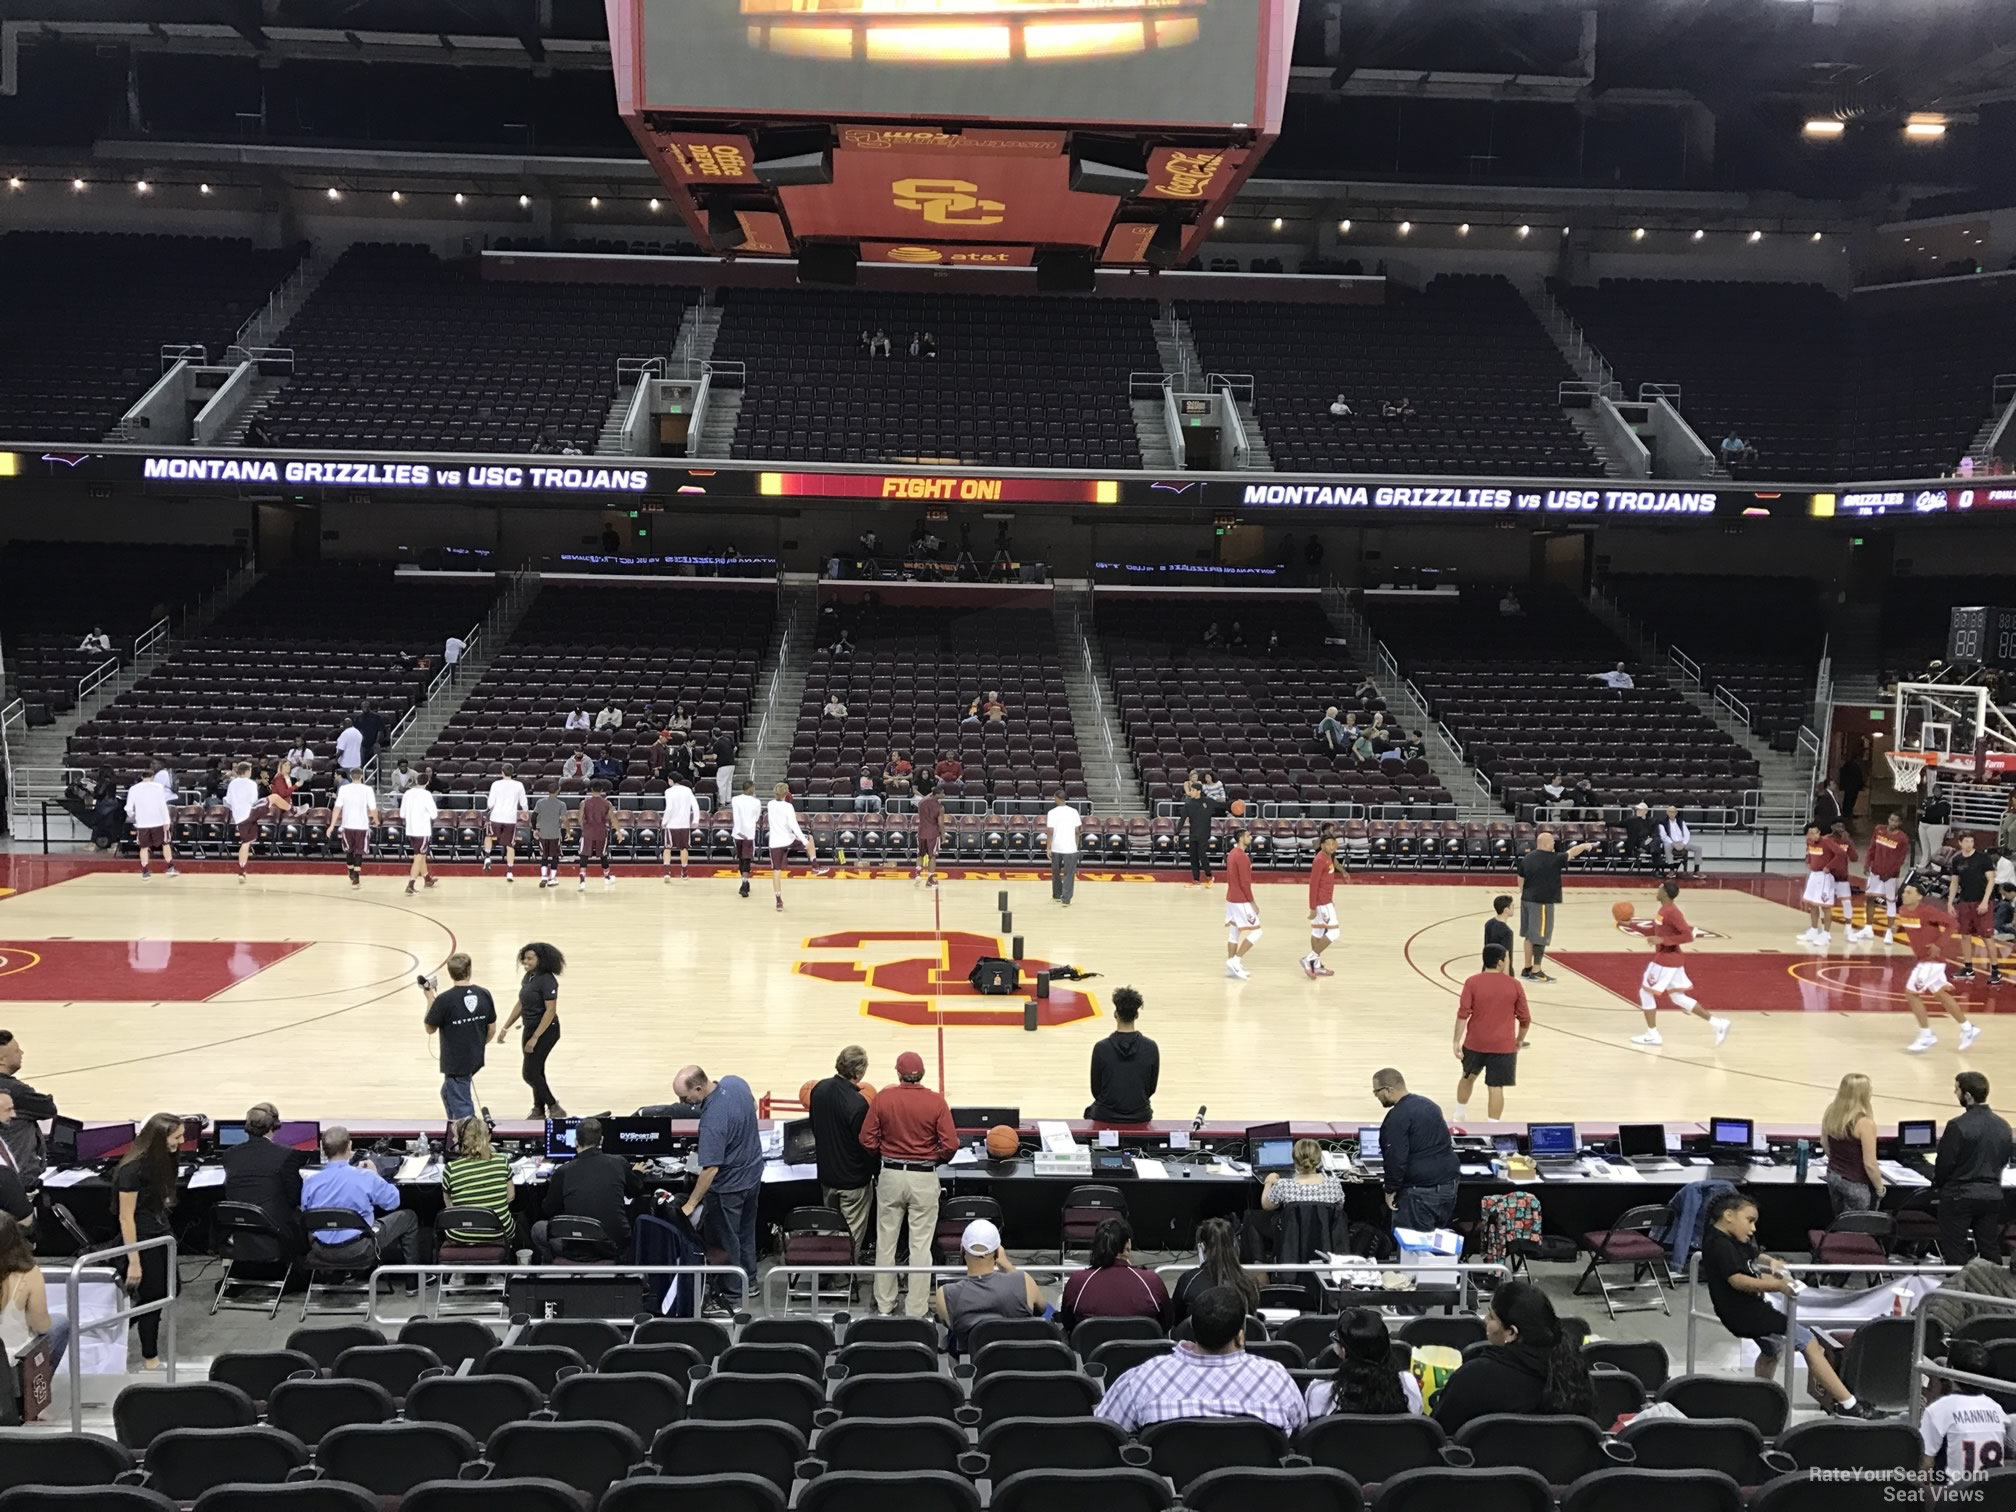 section 116, row 10 seat view  - galen center